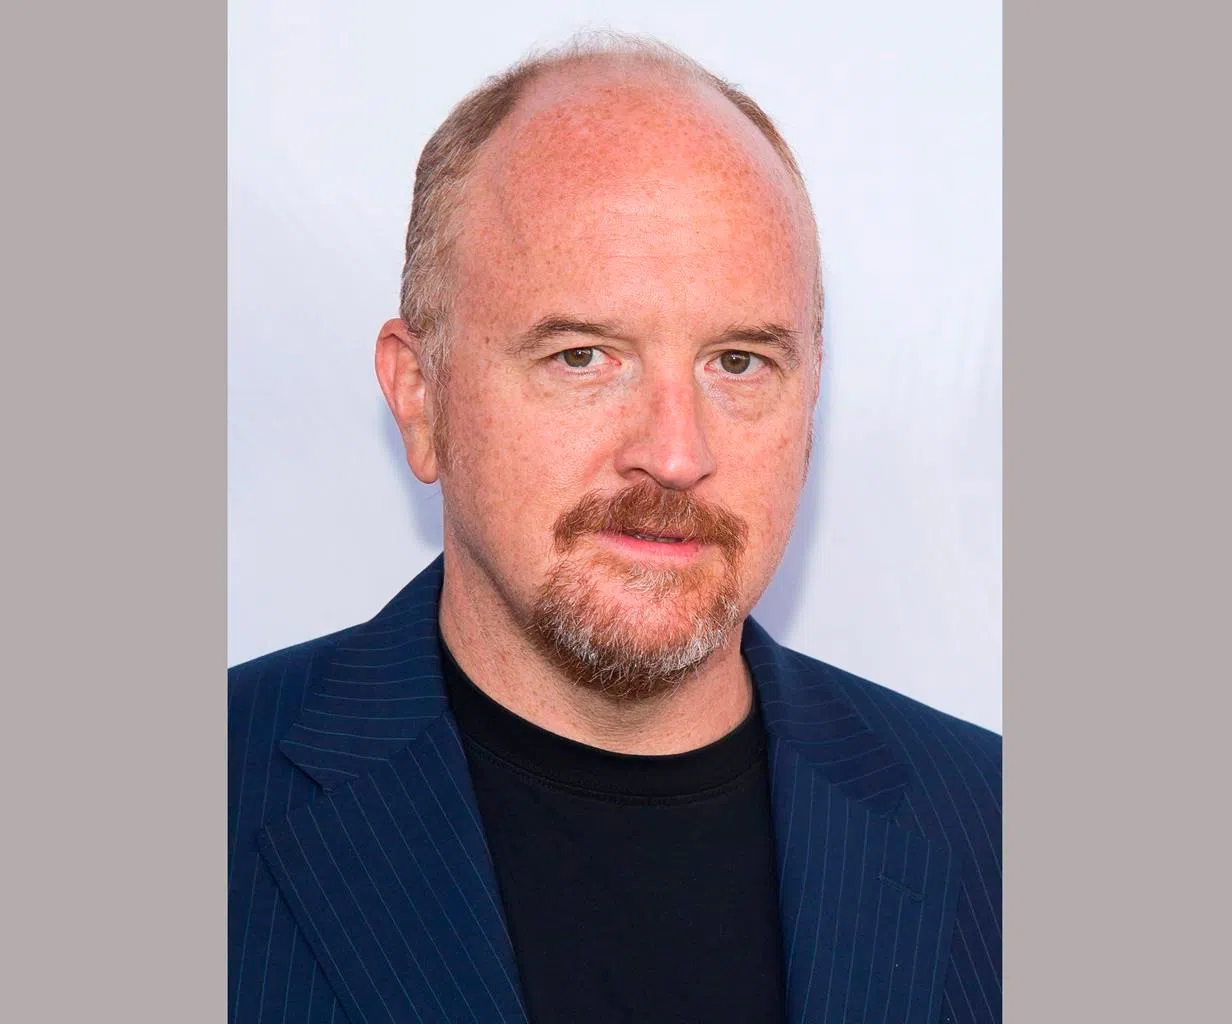 Louis C.K.'s Former Manager Dave Becky Apologizes for “Perceived